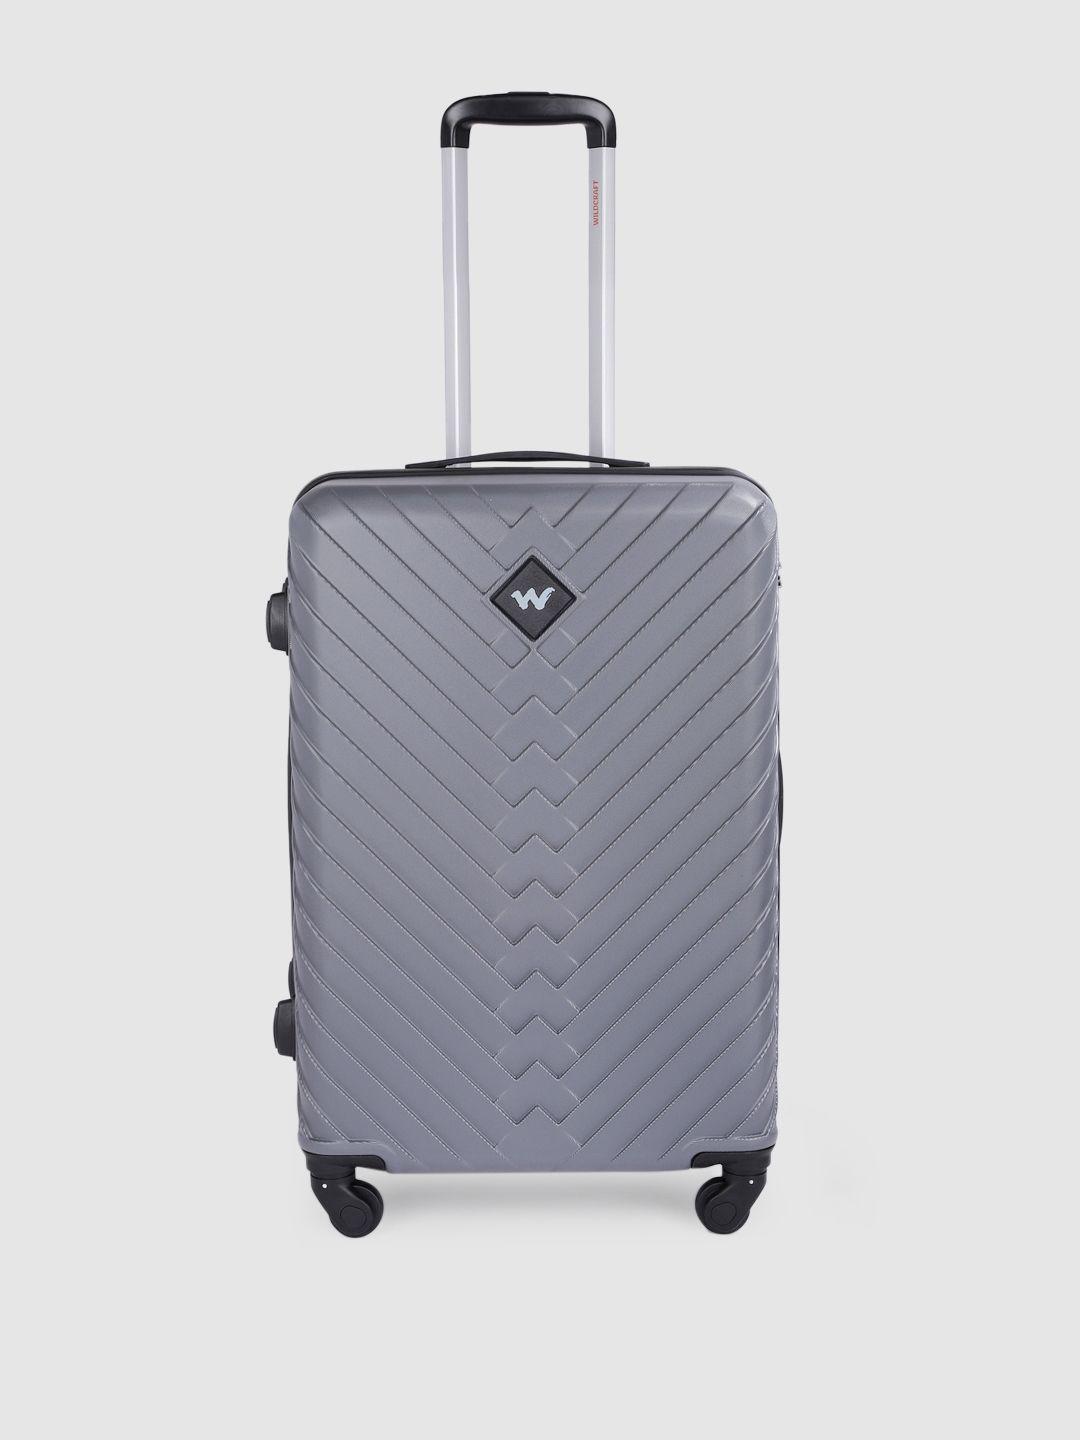 Wildcraft Citron Textured Hard Sided Large Trolley Suitcase